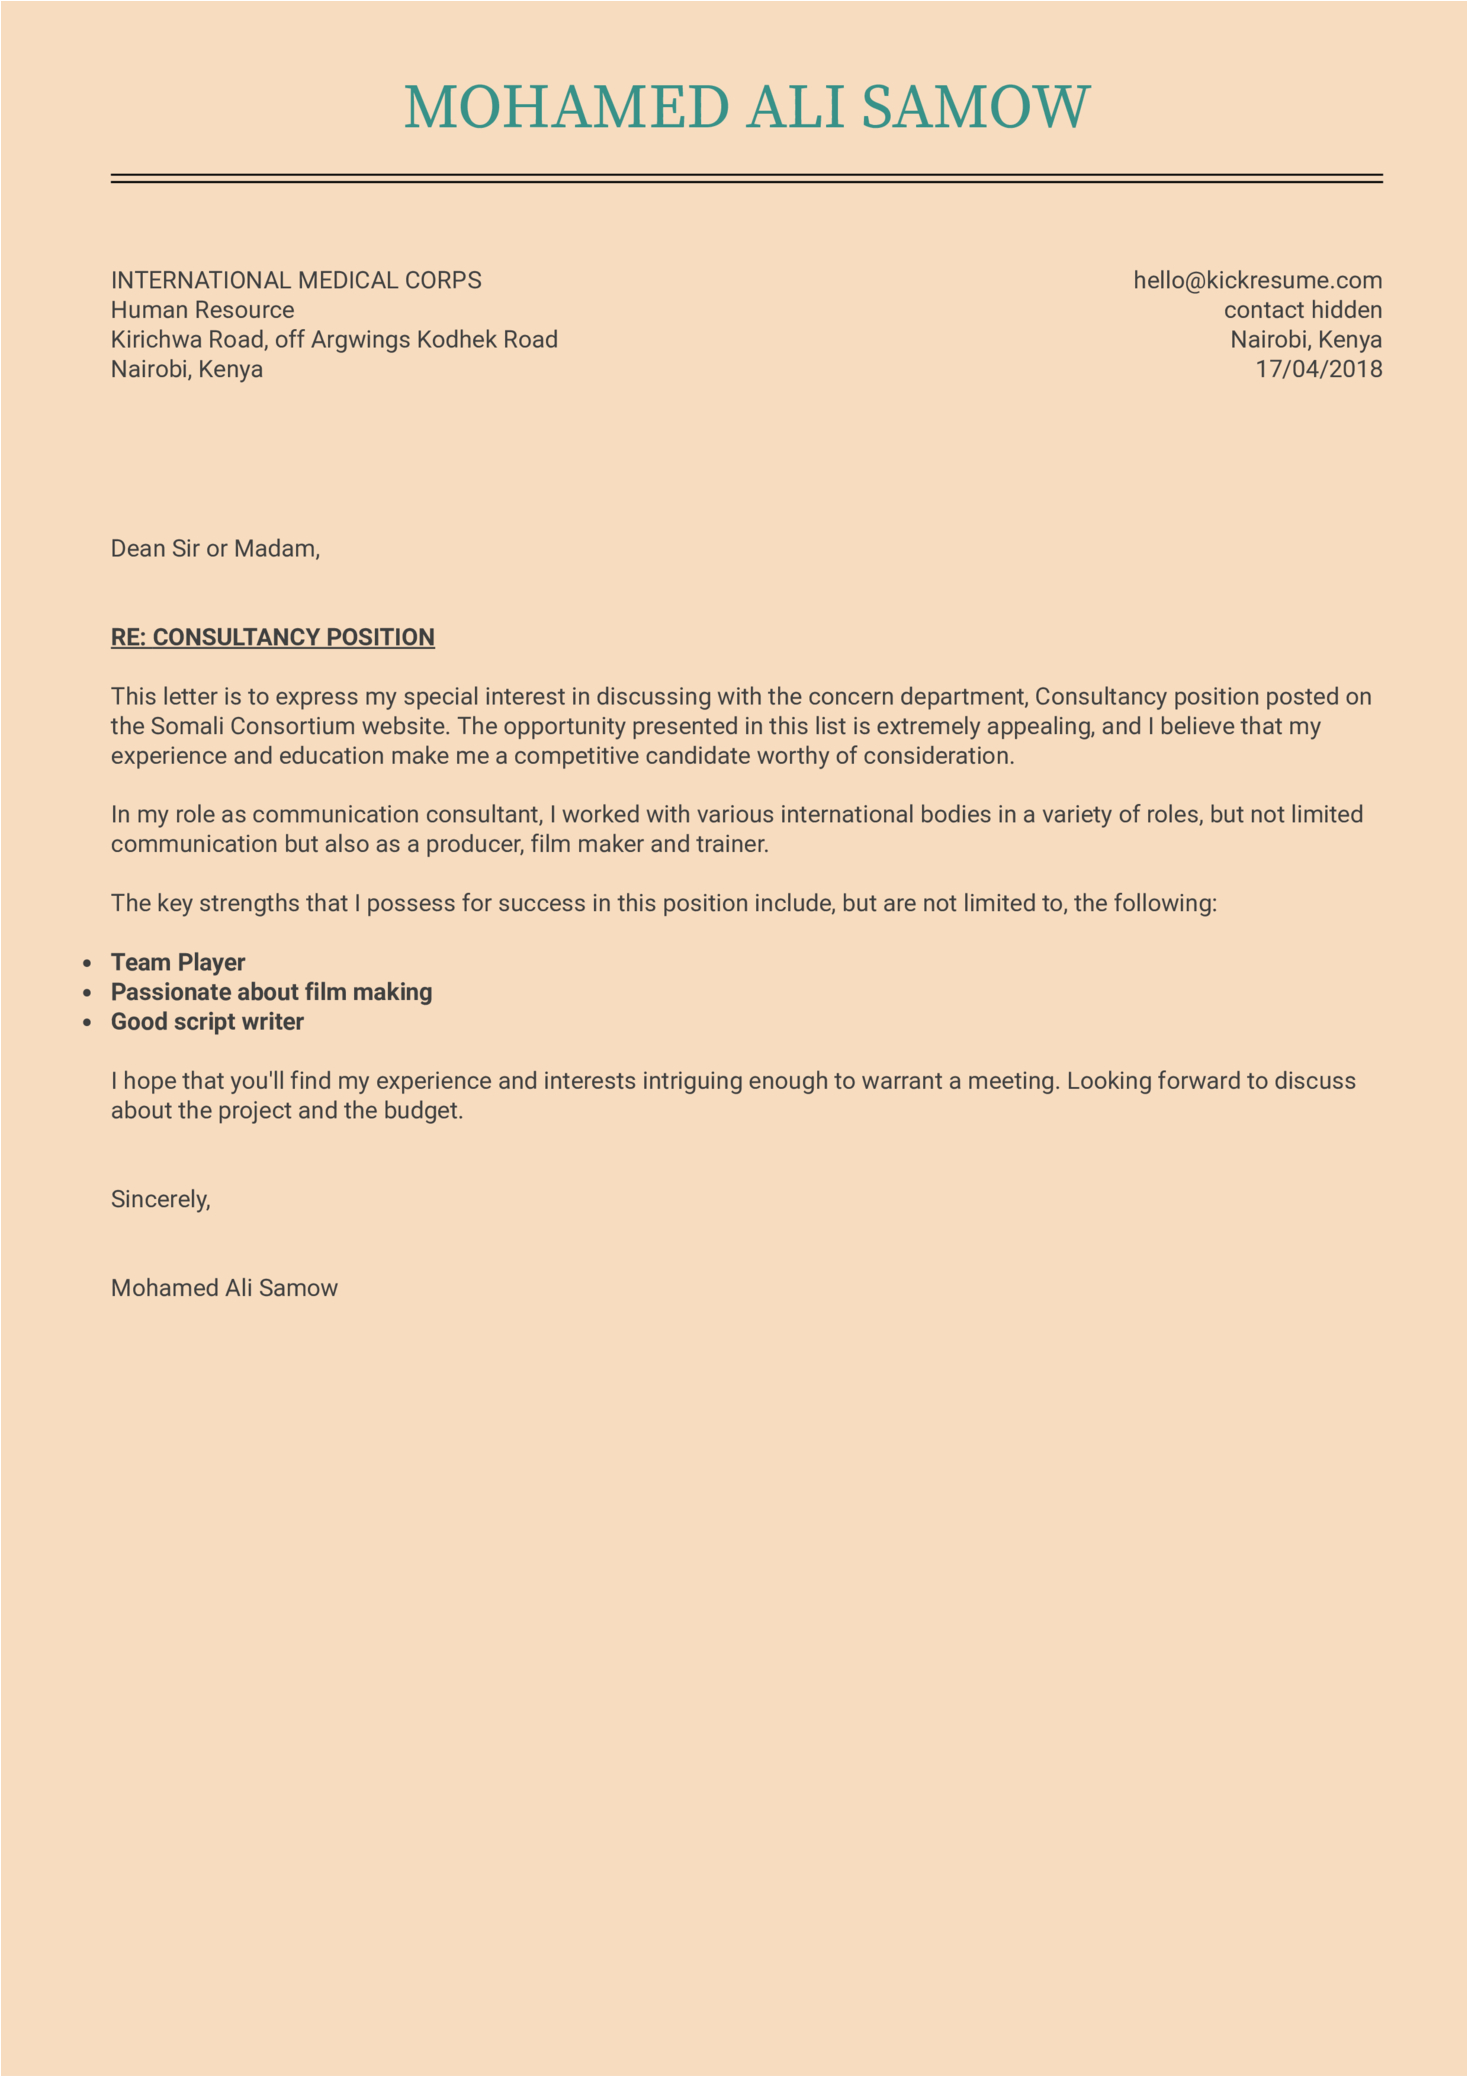 Sample Cover Letter for Resume Project Manager It Project Manager Cover Letter Example